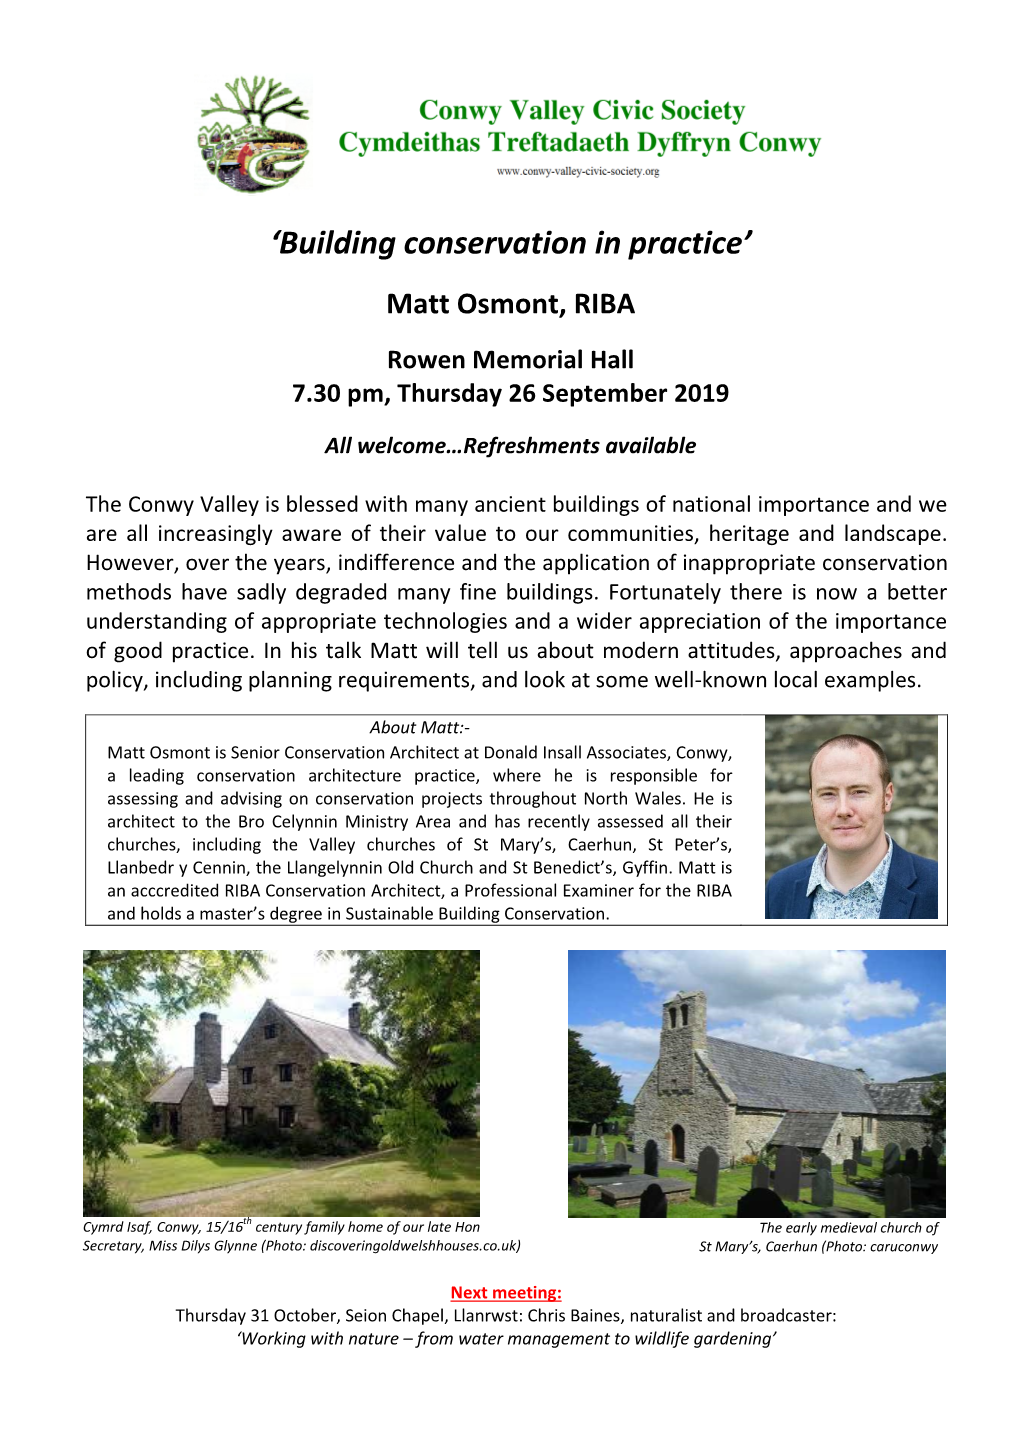 'Building Conservation in Practice'